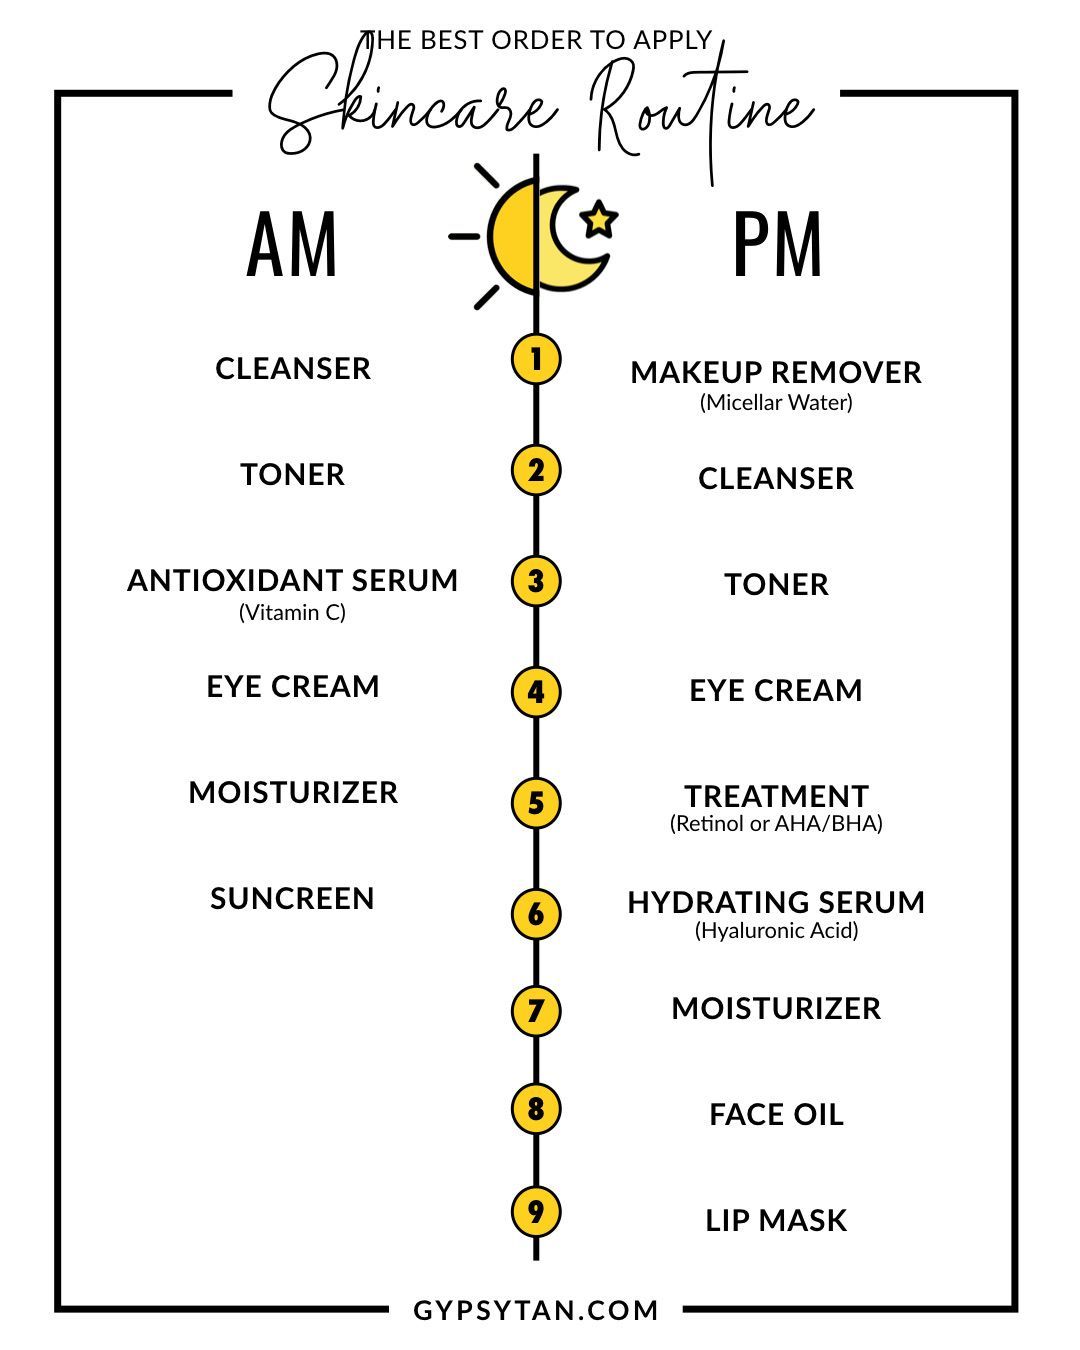 How to Layer Skin Care | Printable Guide: Order to Apply Skin Care Products - How to Layer Skin Care | Printable Guide: Order to Apply Skin Care Products -   17 morning beauty Tips ideas